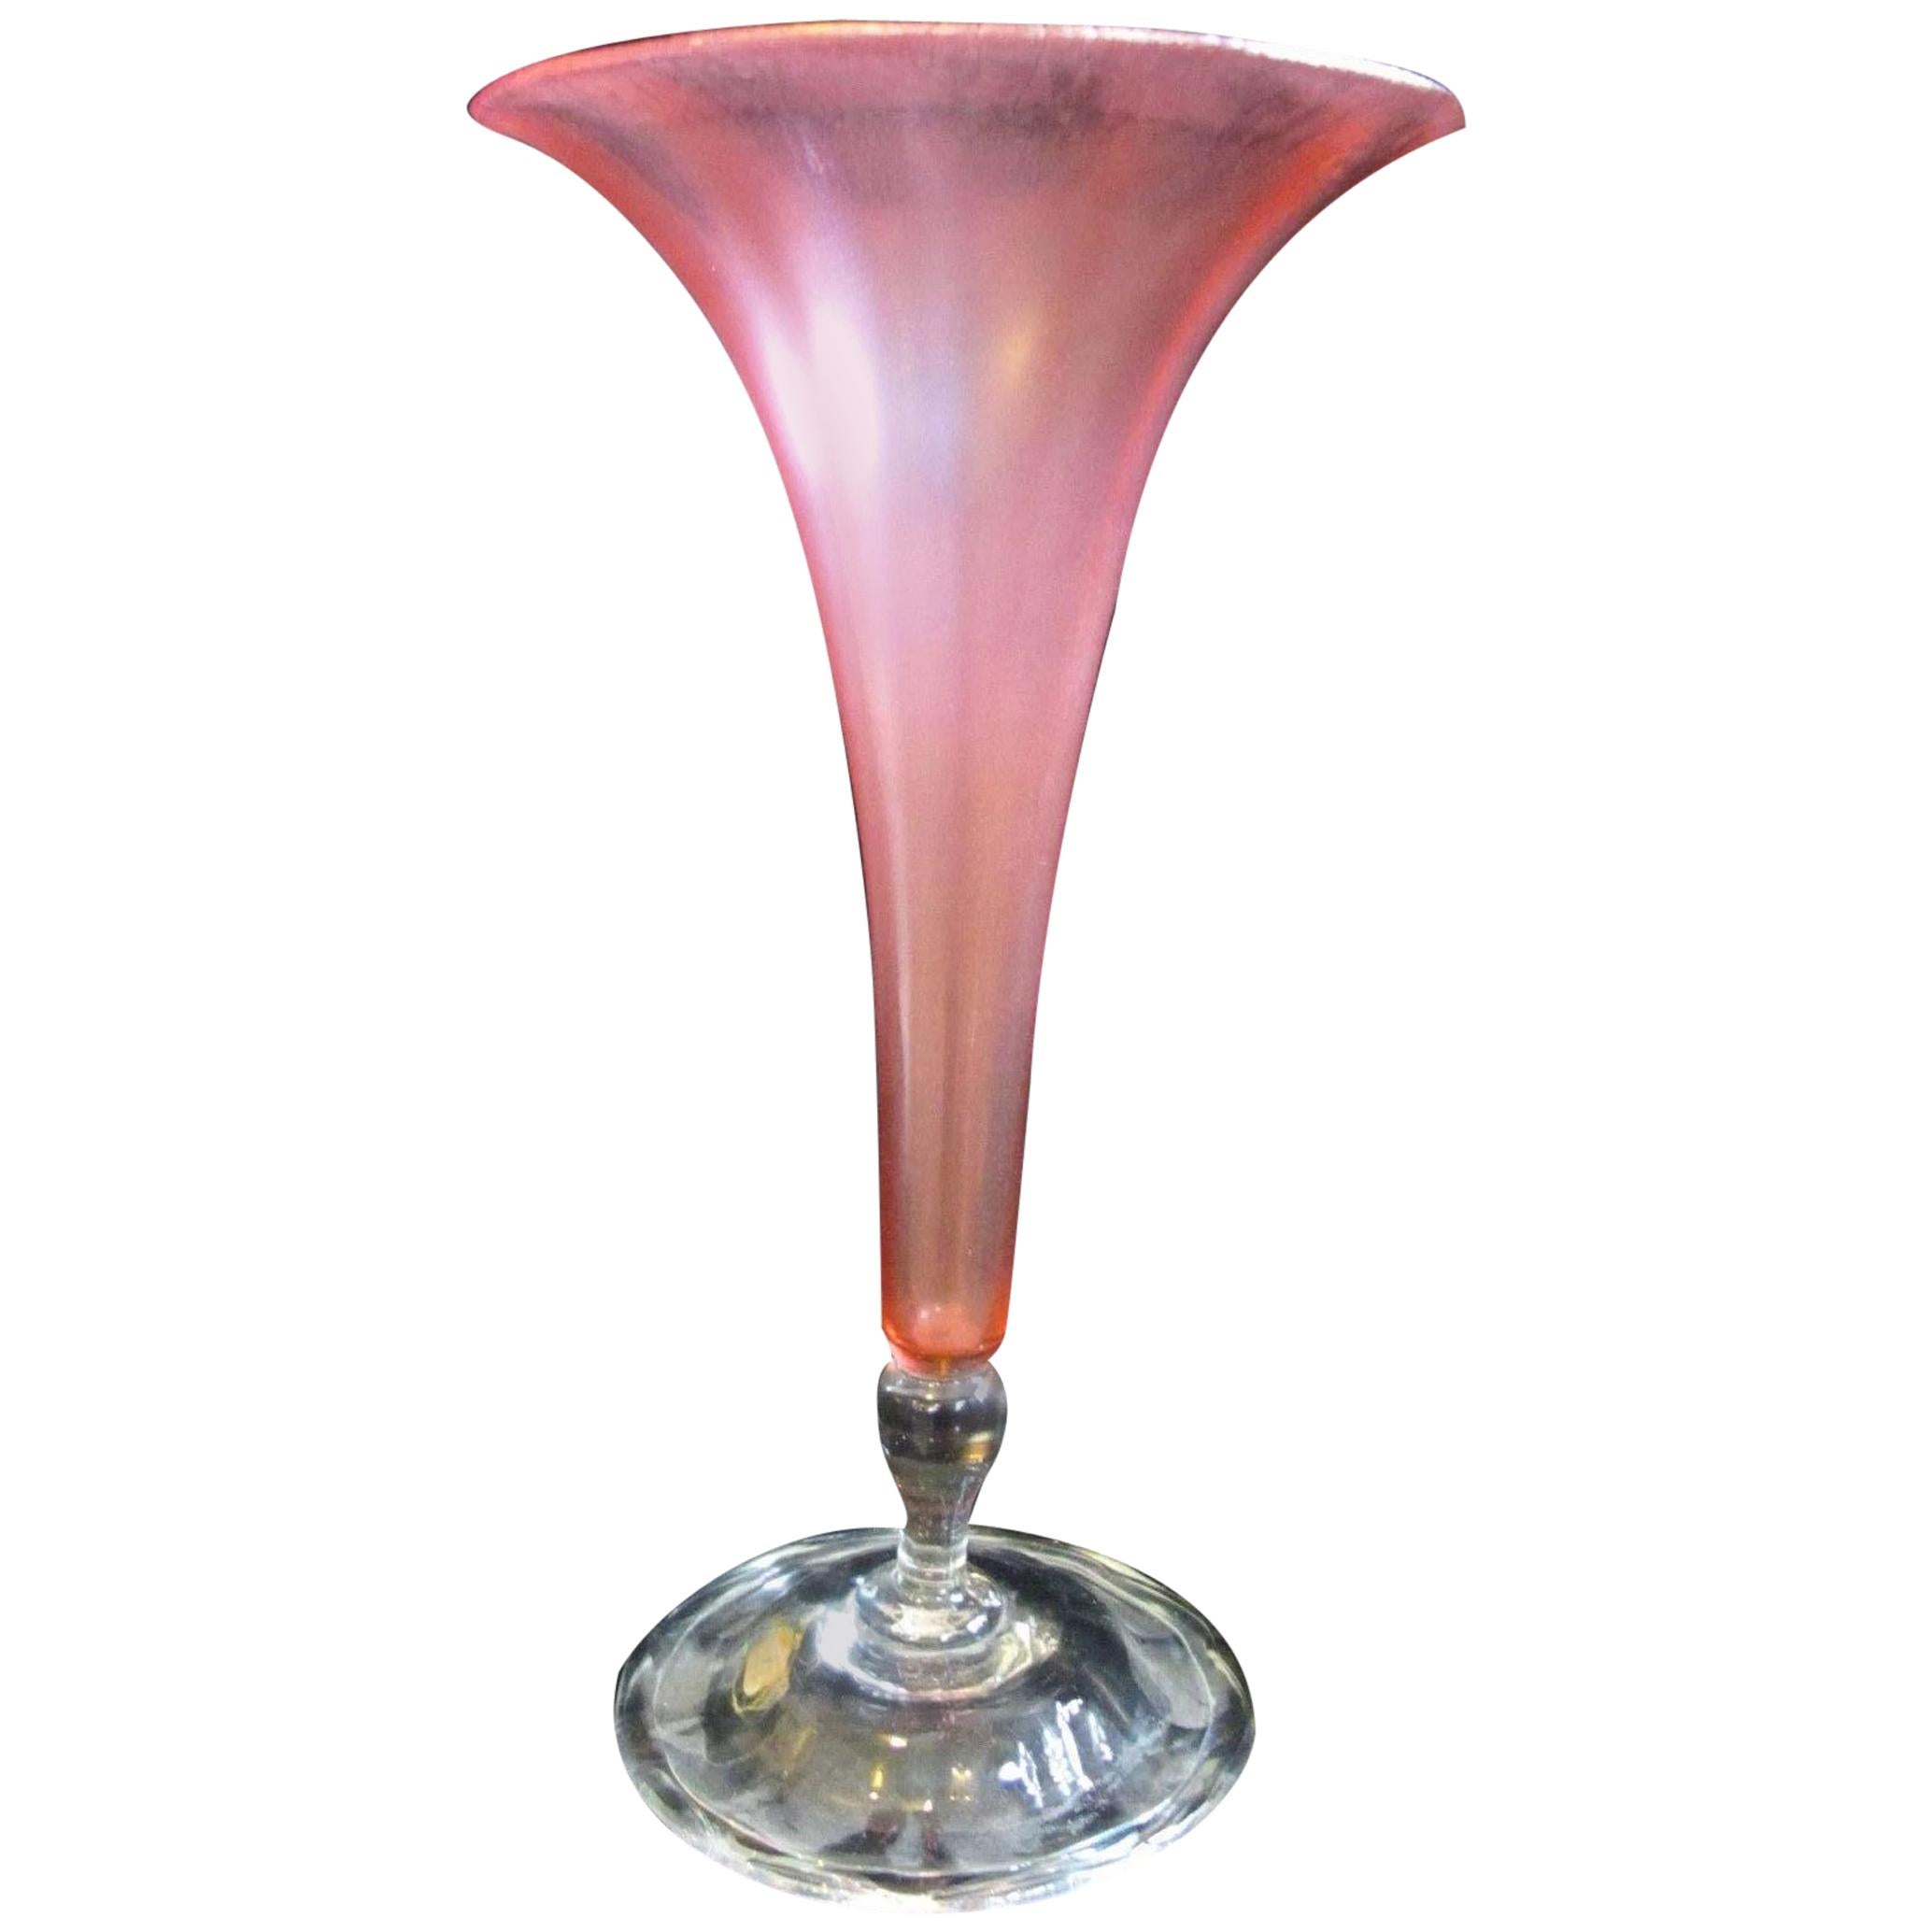 Louis Comfort Tiffany Favrile Trumpet Vase, 1885 Iridescent Pink, Marked For Sale